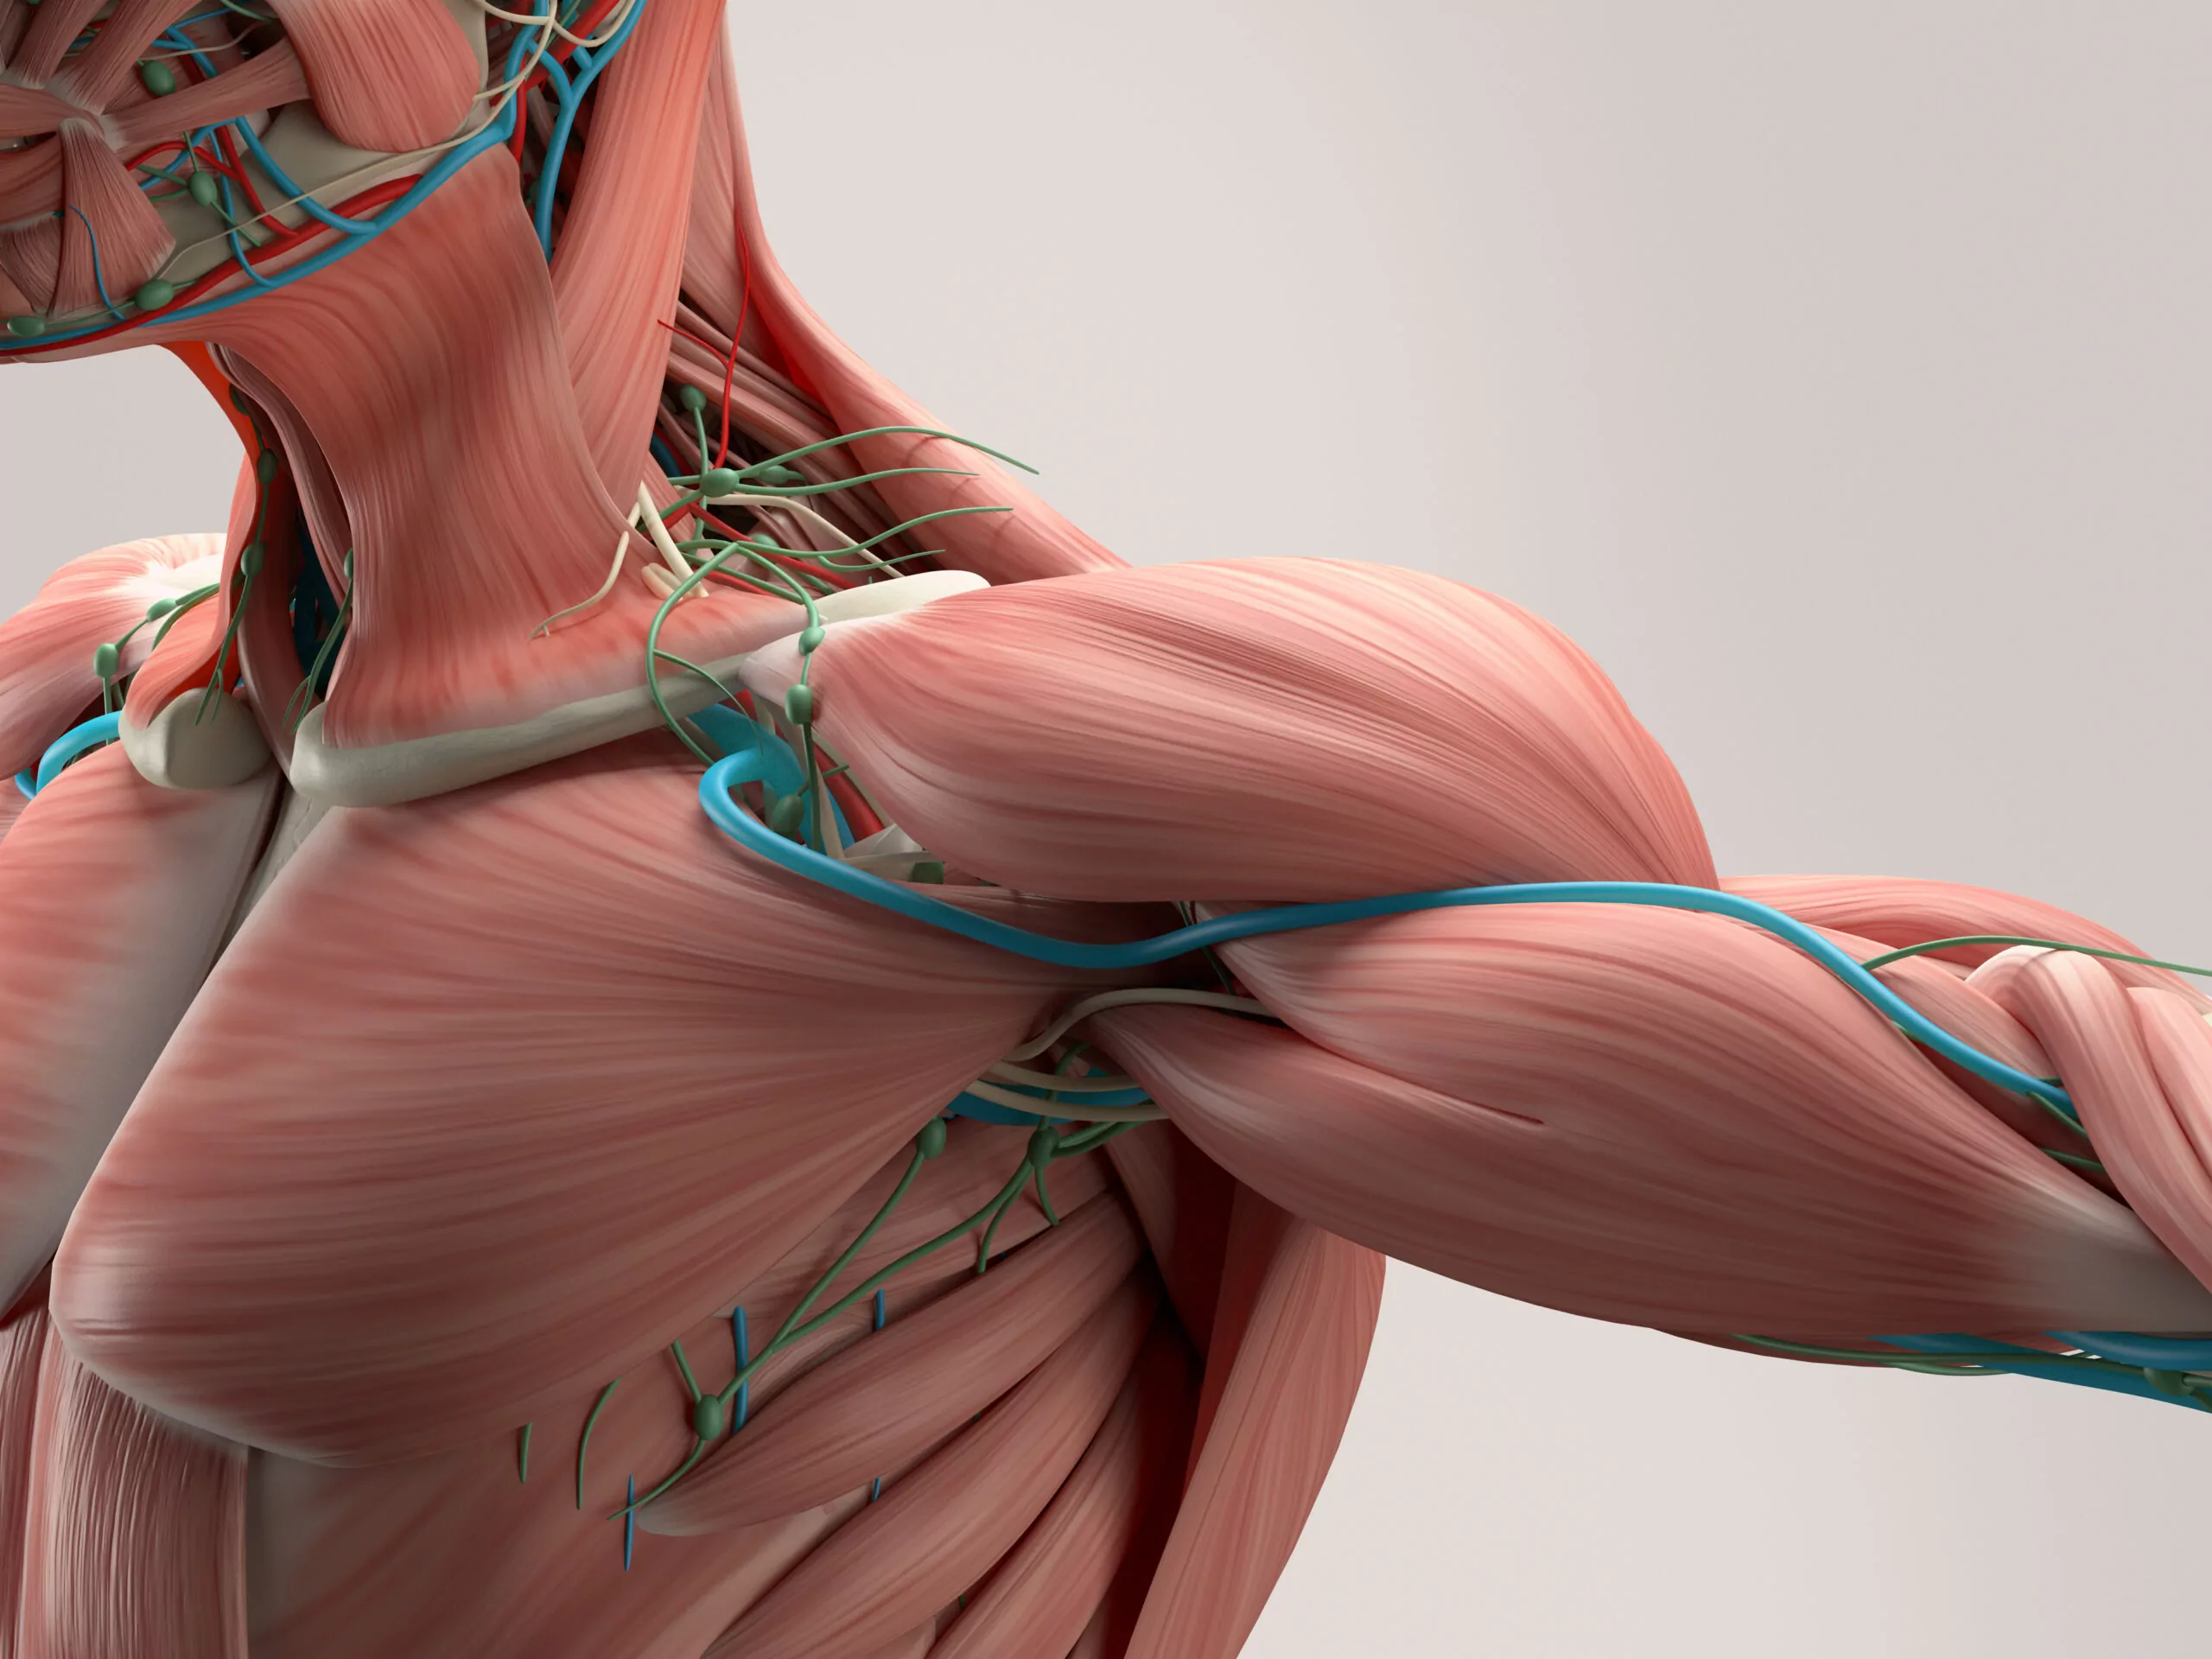 Pulled Chest Muscle: Symptoms, Causes and Treatment – The Amino